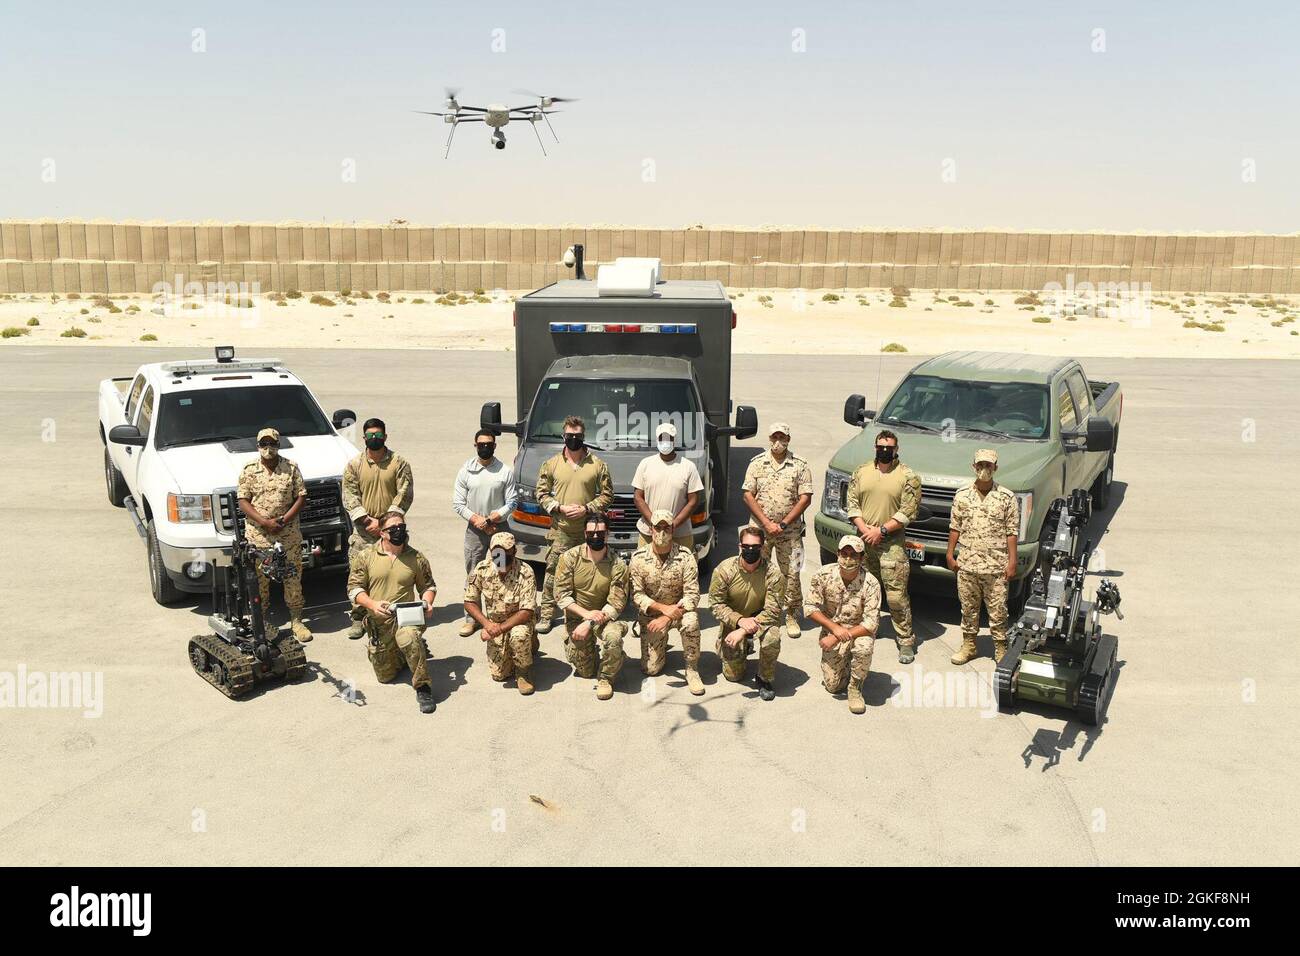 https://c8.alamy.com/comp/2GKF8NH/210407-n-uh865-1143-isa-air-base-bahrain-april-7-2021-us-navy-explosive-ordnance-disposal-eod-technicians-assigned-to-commander-task-force-56-and-bahrain-defense-force-engineers-pose-for-a-group-photo-after-completing-eod-training-during-exercise-neon-defender-21-april-7-neon-defender-21-is-a-bilateral-maritime-exercise-between-the-us-and-bahrain-designed-to-enhance-interoperability-and-readiness-fortify-military-to-military-relationships-and-advance-operational-capabilities-allowing-participating-naval-forces-to-effectively-develop-the-necessary-skills-to-address-threats-to-2GKF8NH.jpg